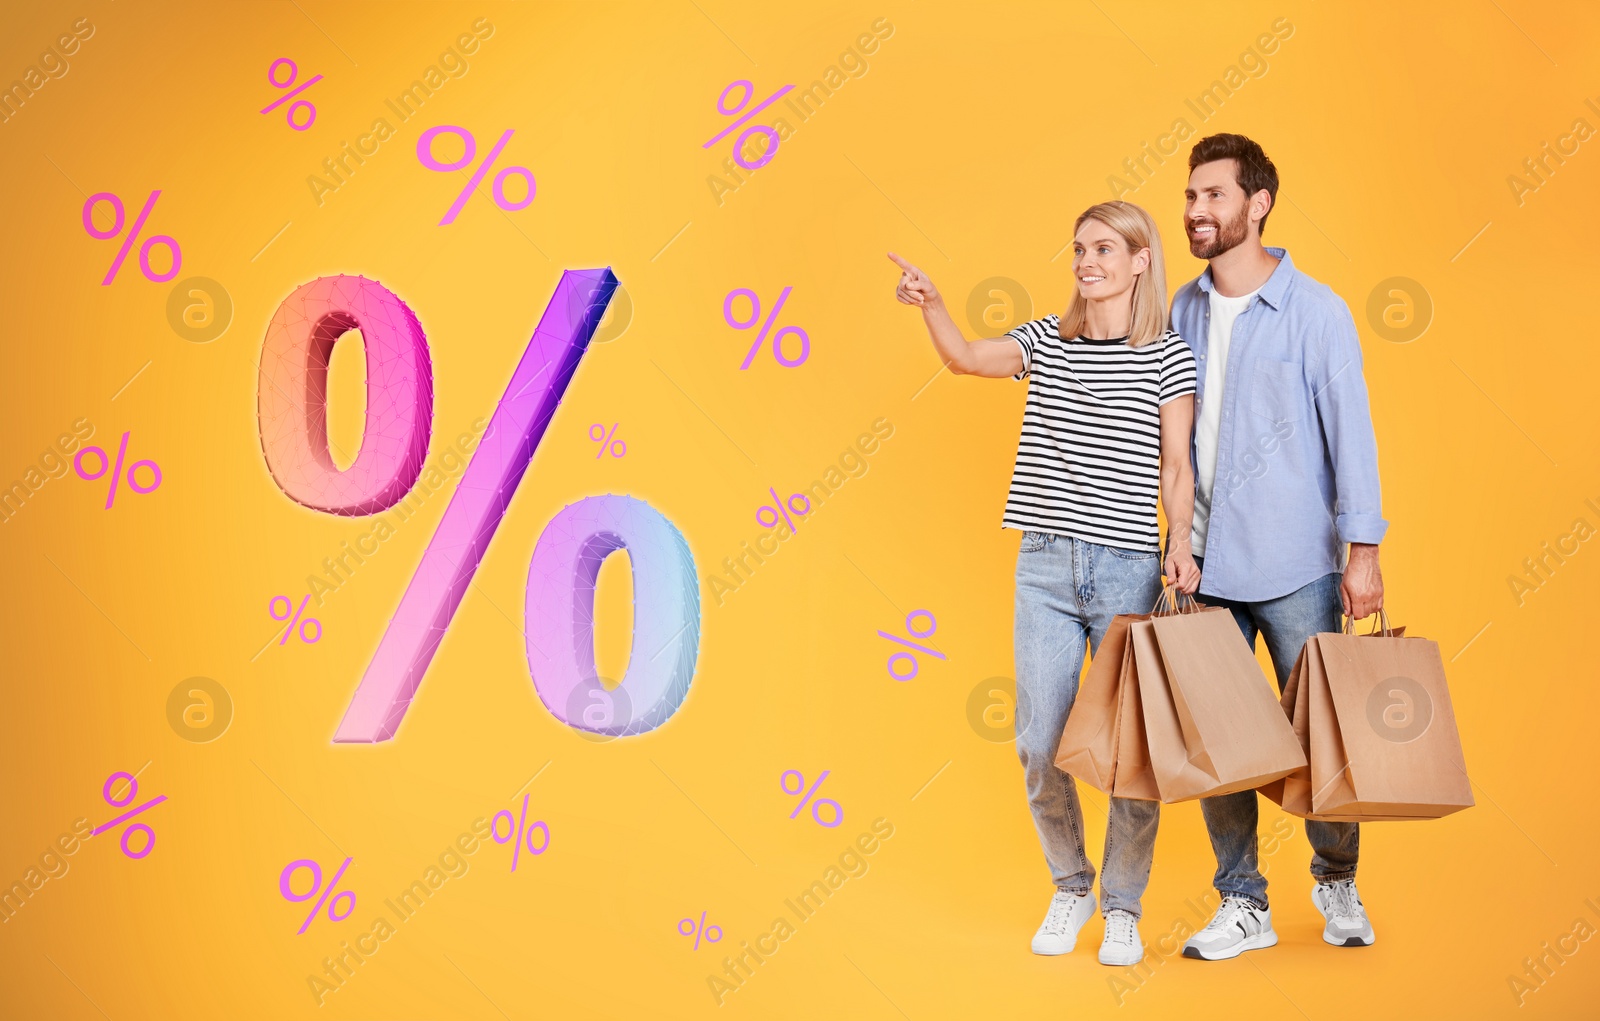 Image of Discount offer. Couple with shopping bags looking at percent signs on orange background